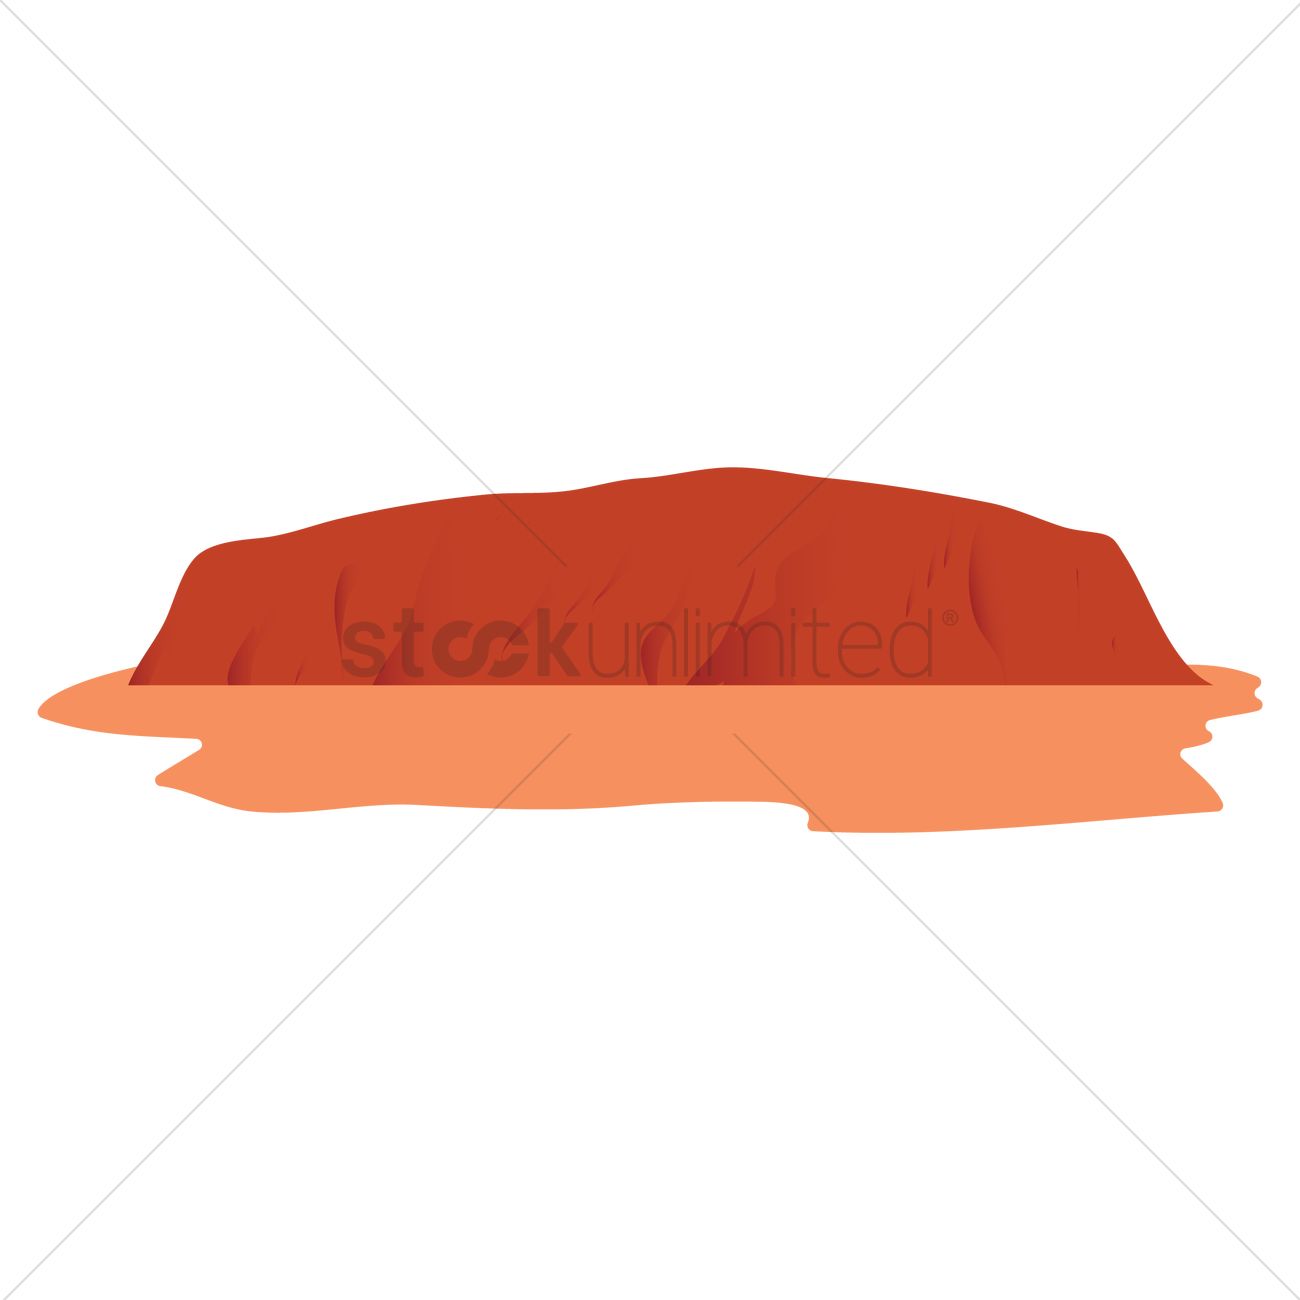 Ayers Rock svg #14, Download drawings